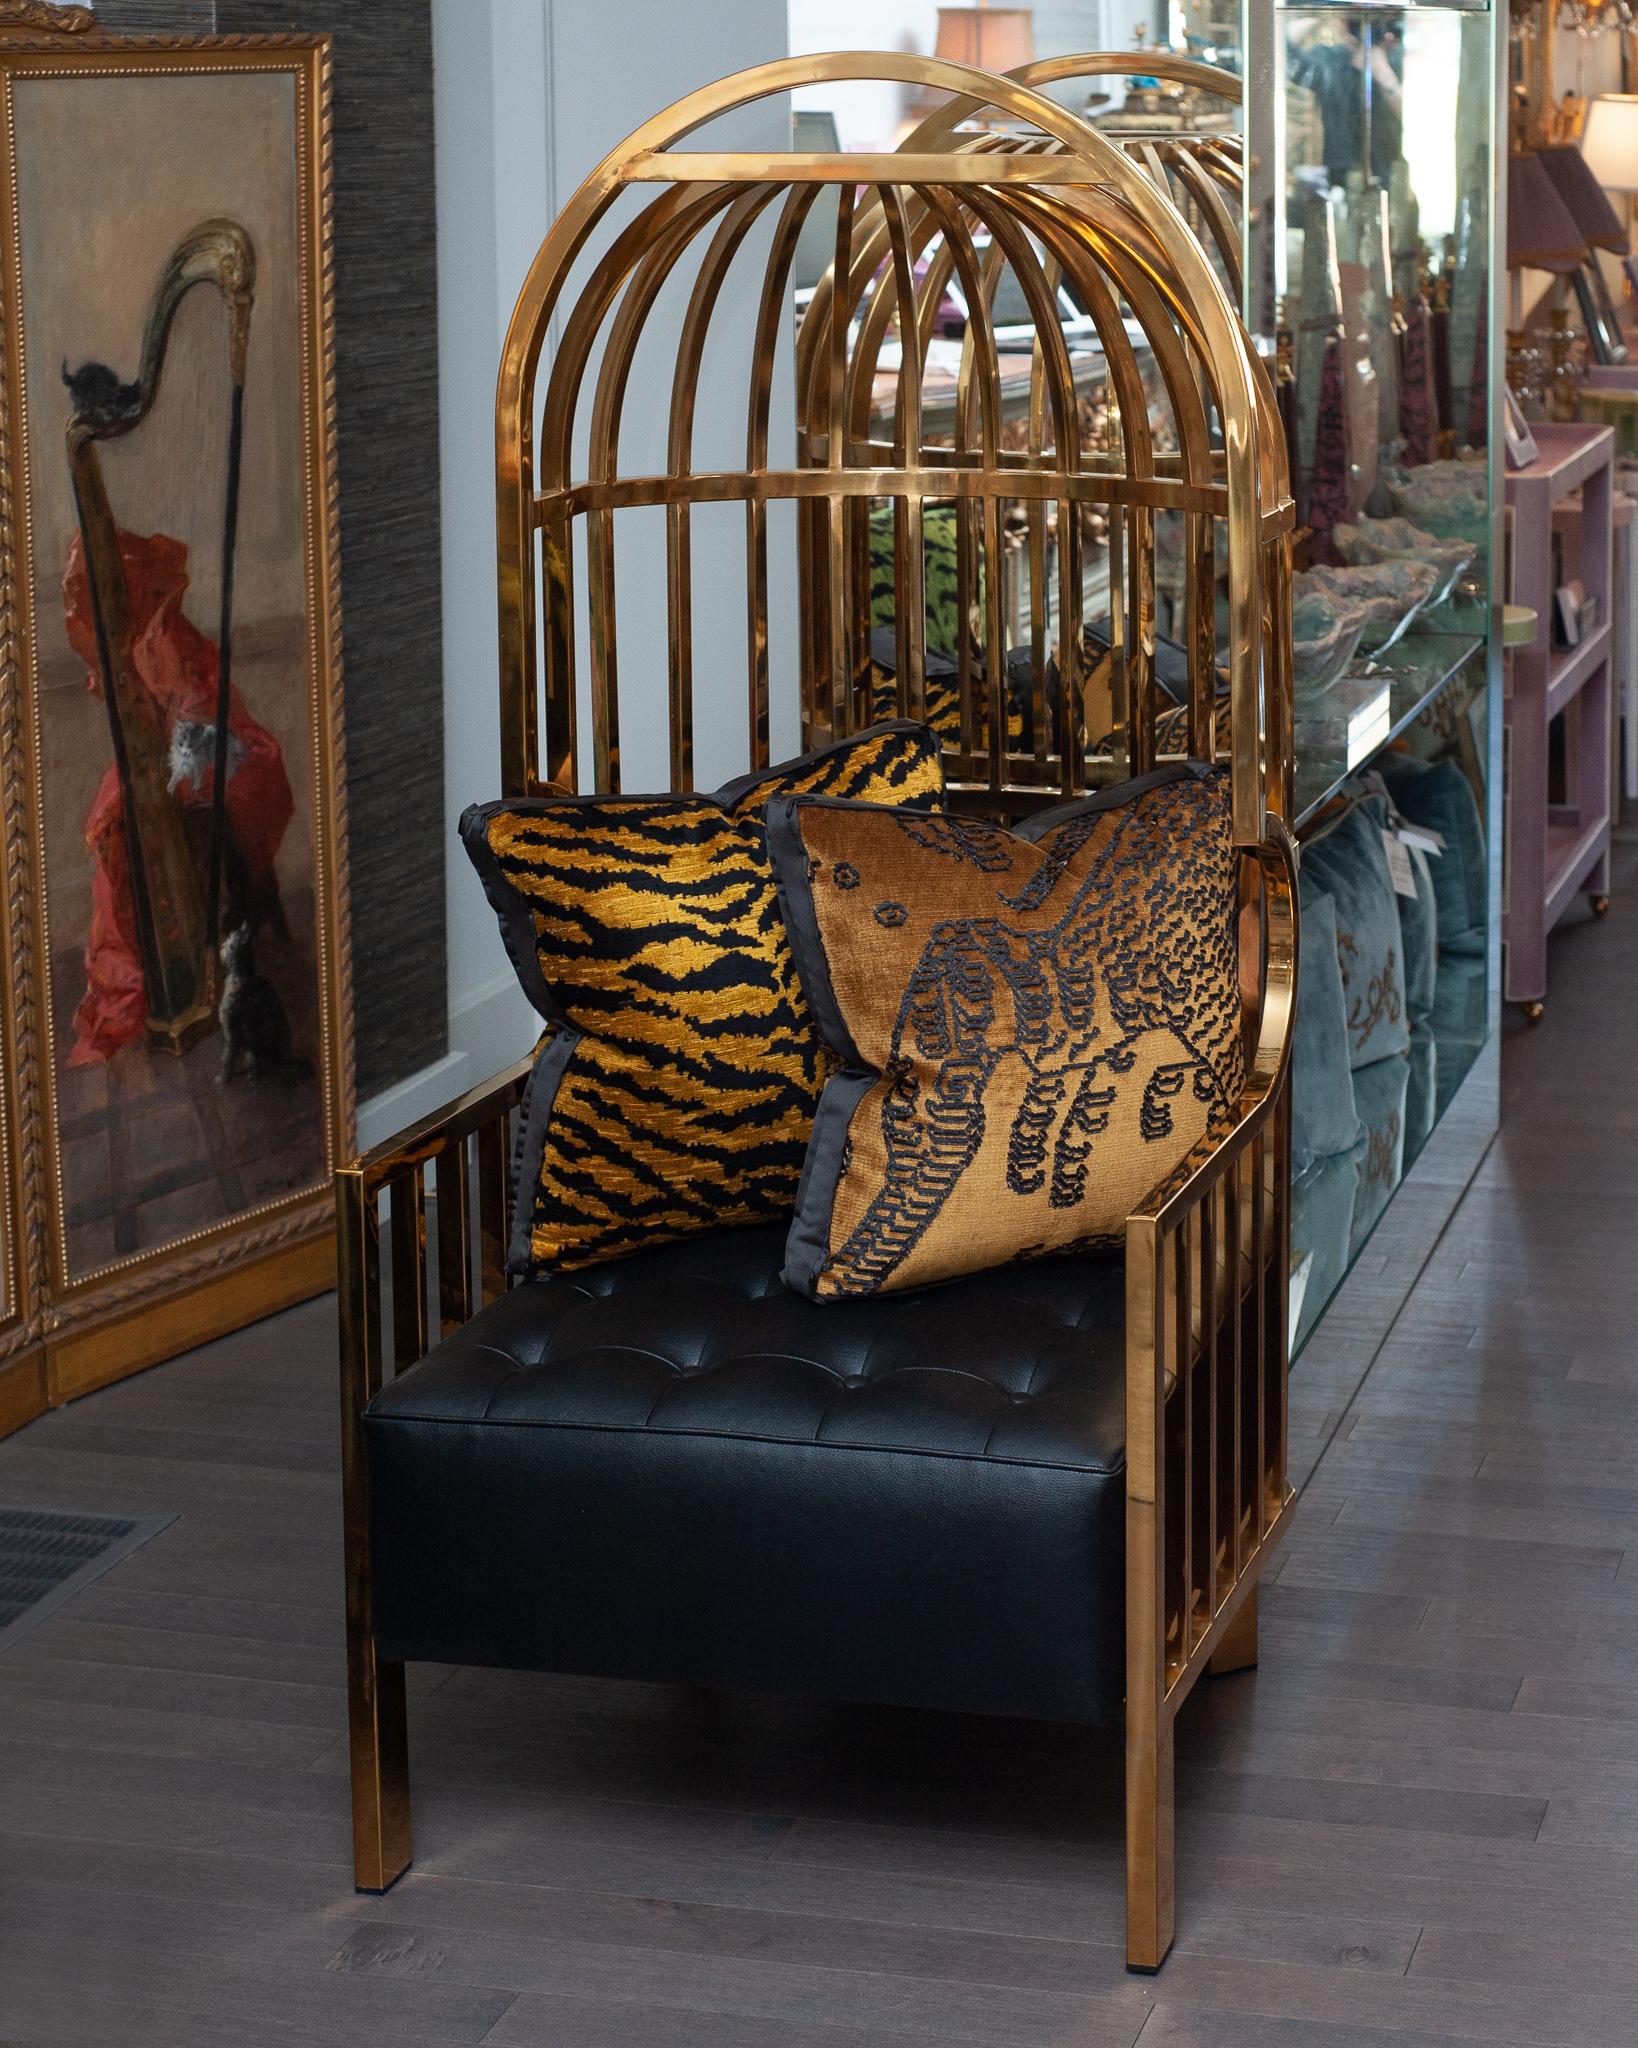 A magnificent contemporary large polished brass birdcage chair, upholstered with tufted leather. A new reinterpretation of the classic Porter chair in a mid century modern style, this is the perfect statement chair exuding glamour and luxury for any